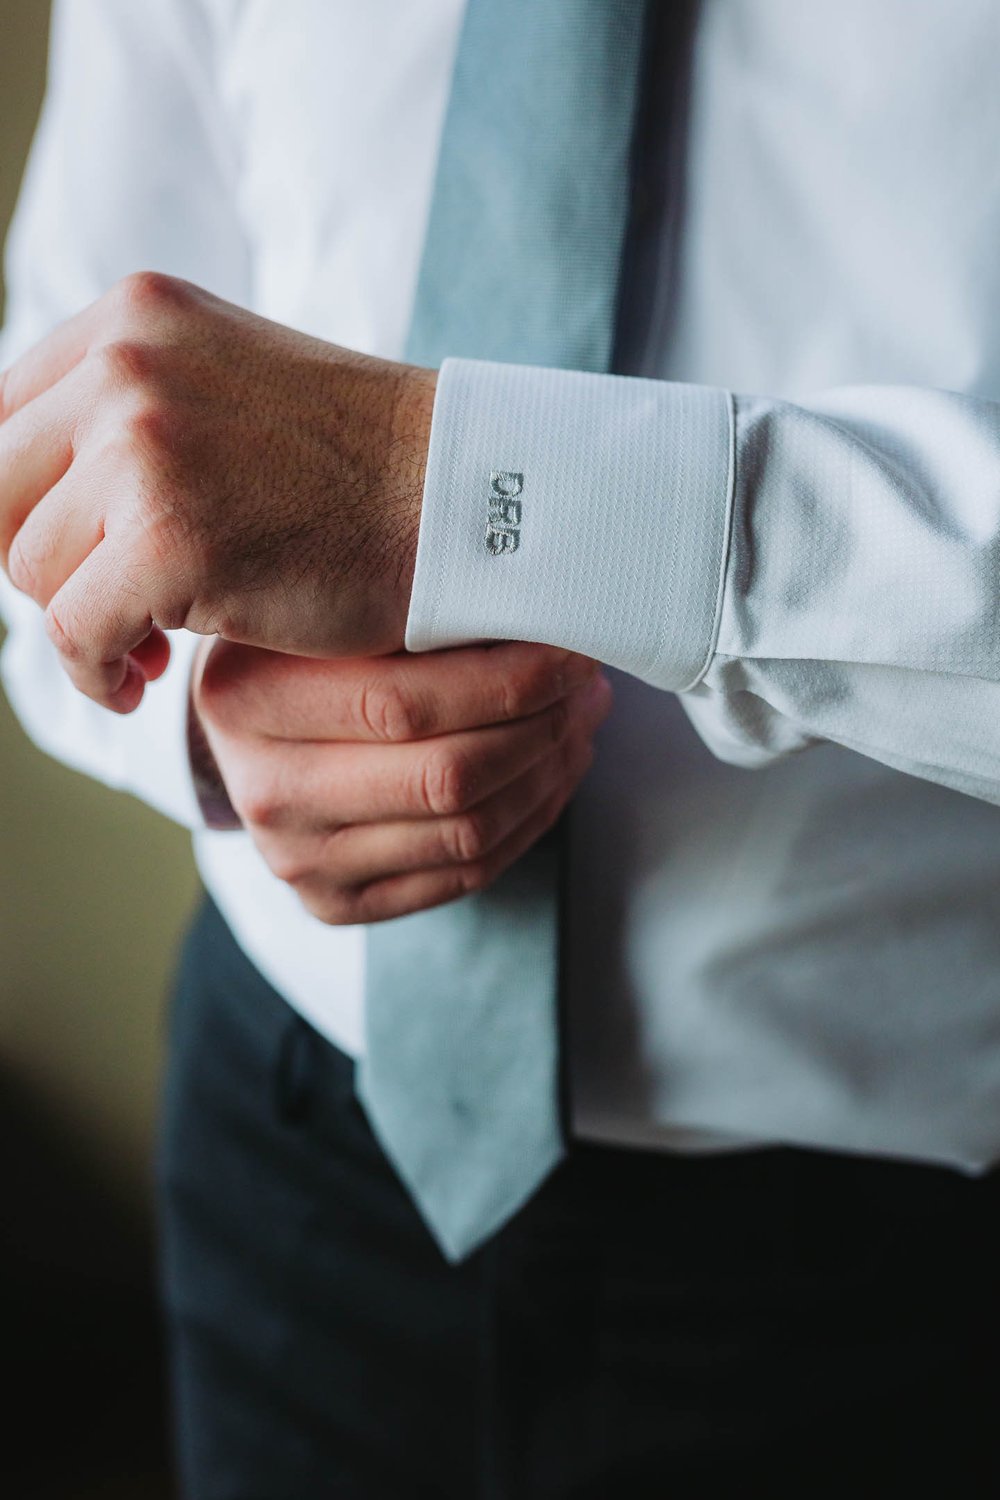 Top Wedding Photographers Near Me | Ravenswood Event Center | J. Brown Photography | groom detail photo of cuffs